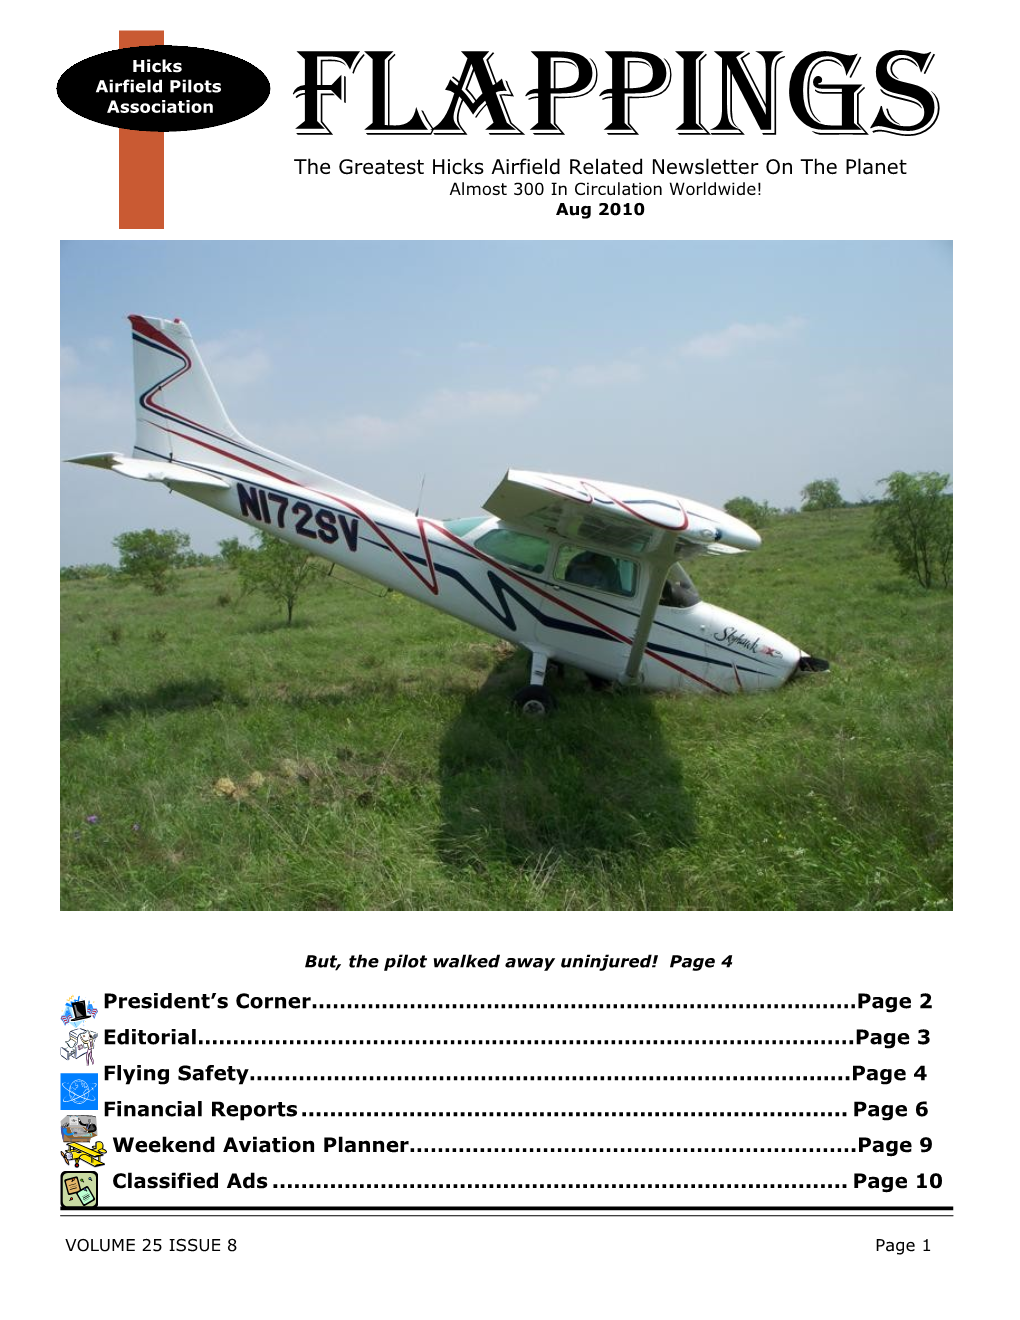 The Greatest Hicks Airfield Related Newsletter on the Planet Almost 300 in Circulation Worldwide! Aug 2010